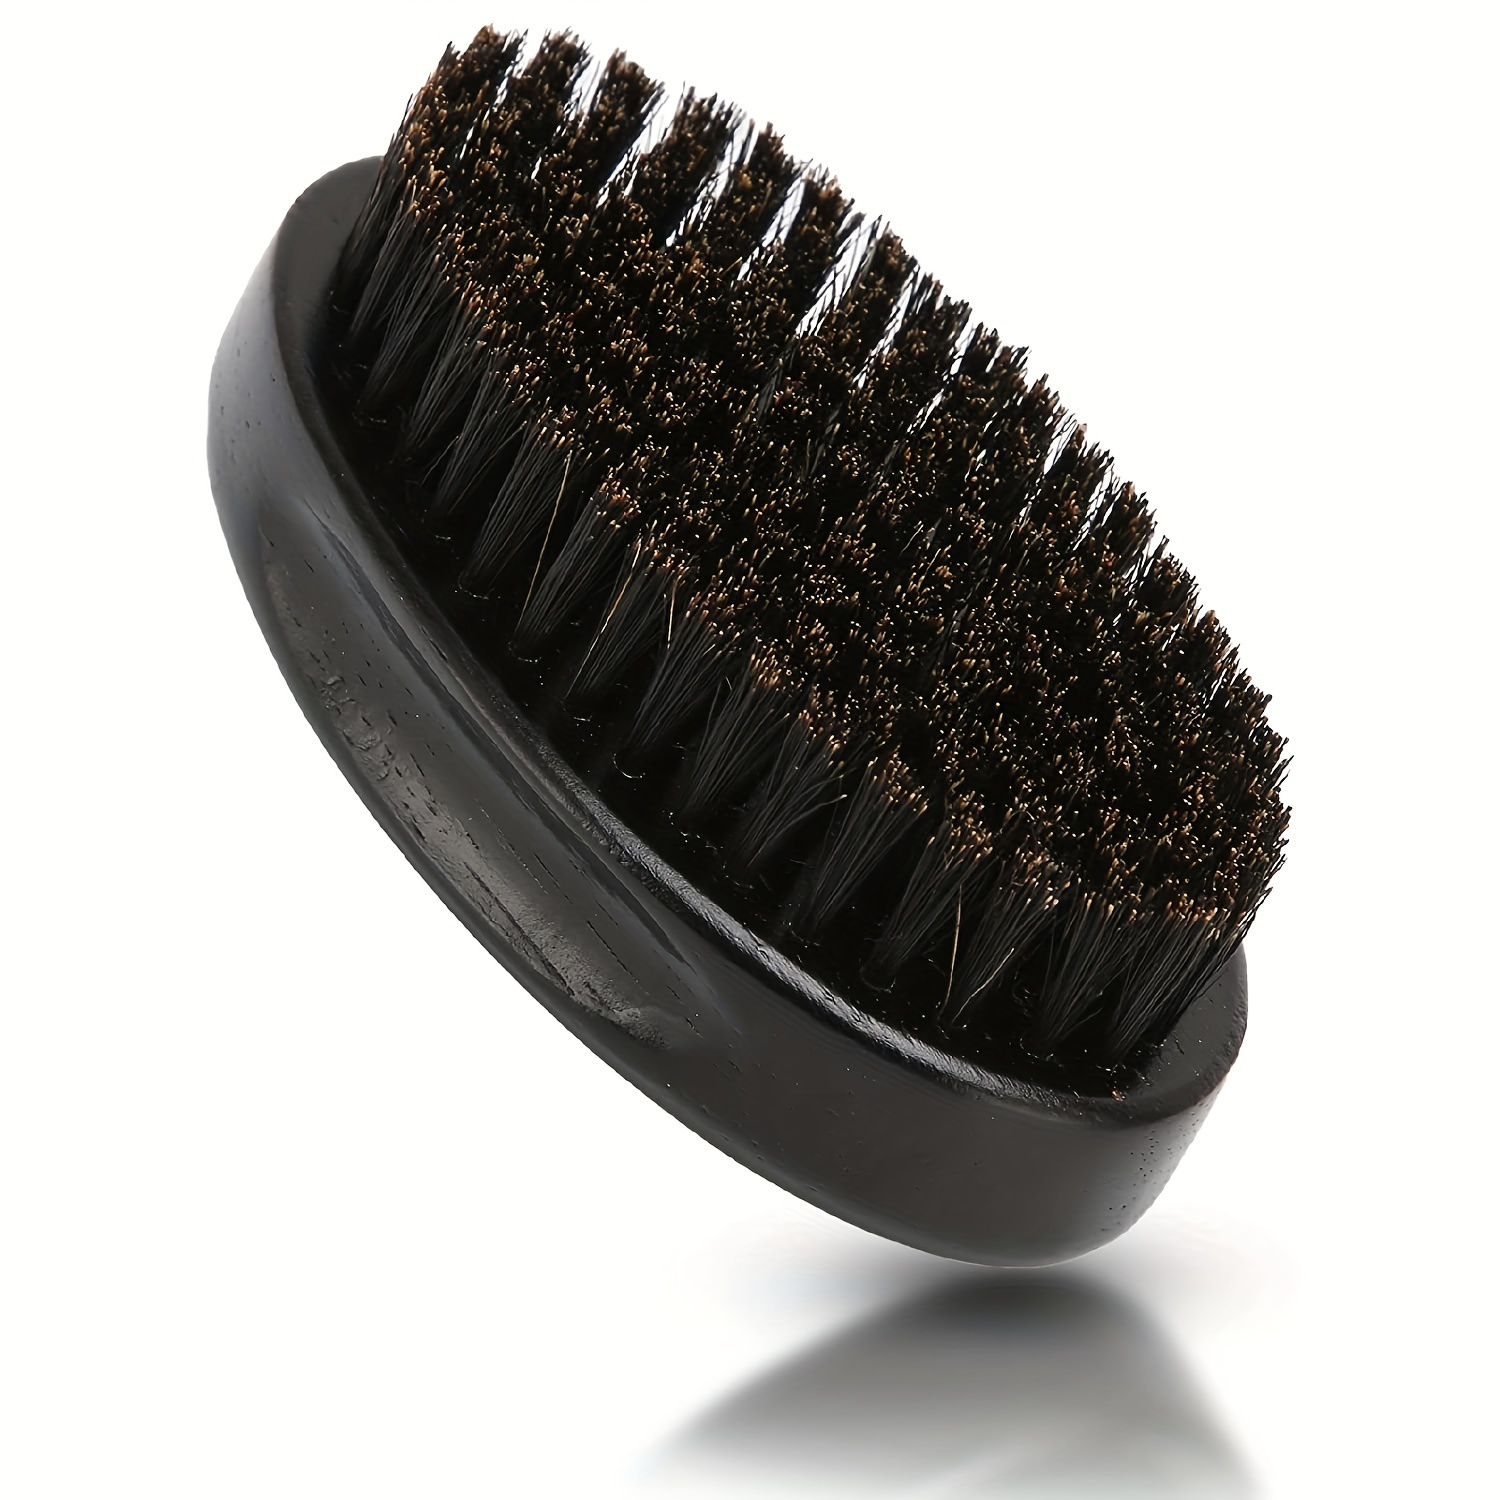 

1pc Bristle Beard Brush For Men, With Medium Hard Bristles To Conquer And Soften Your Facial Hair, Walnut Style Handle, Mens Beard Brush